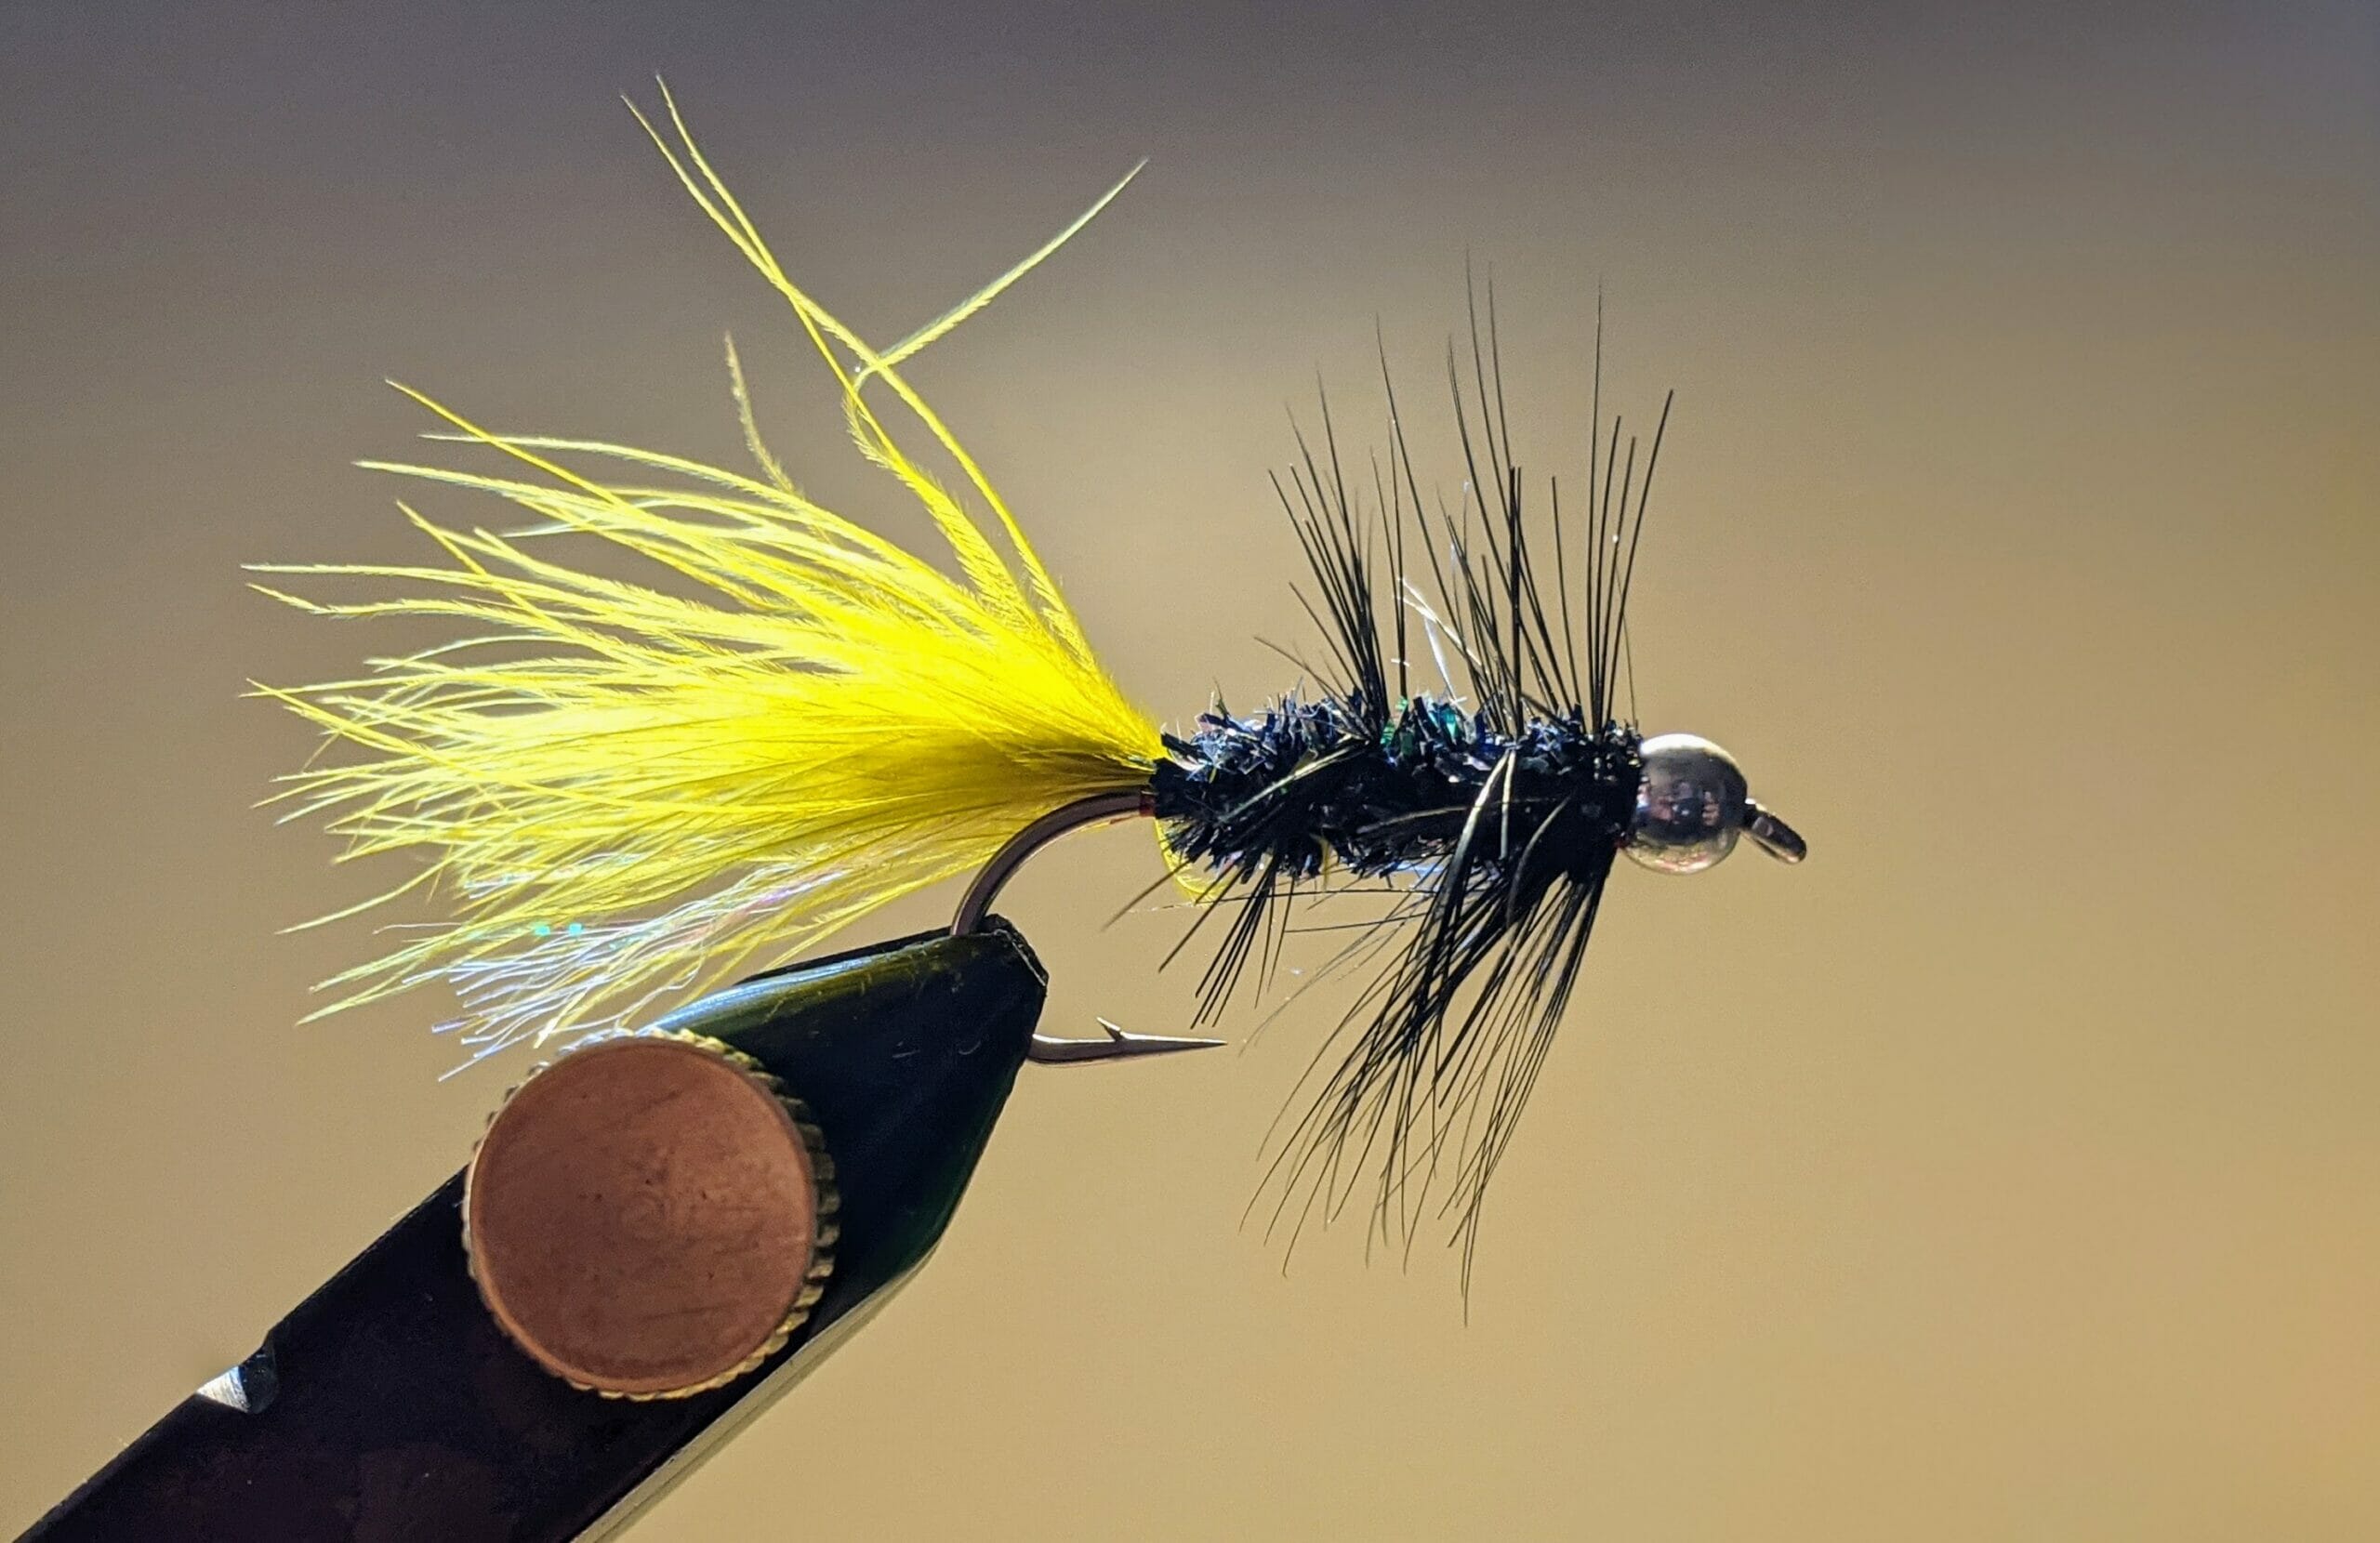 A Woolly Bugger in the vise.